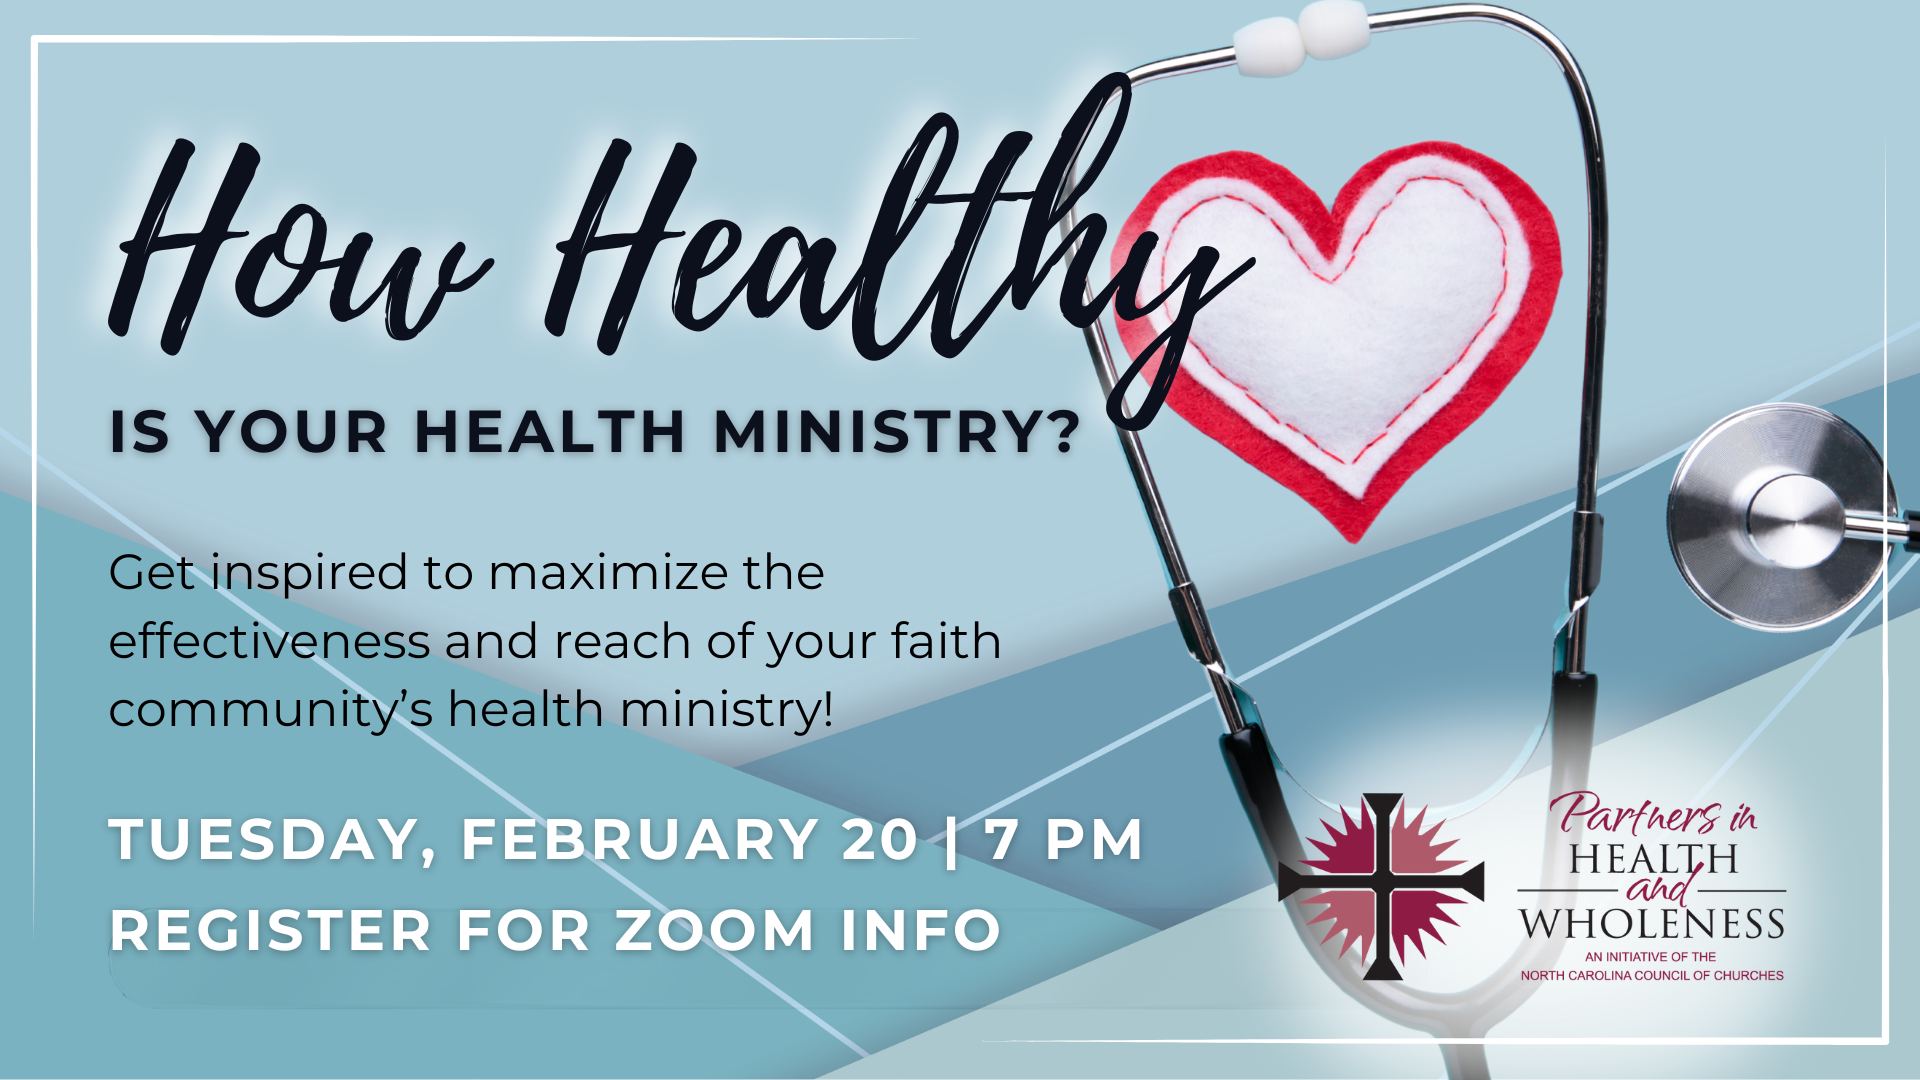 How Healthy is Your Health Ministry?